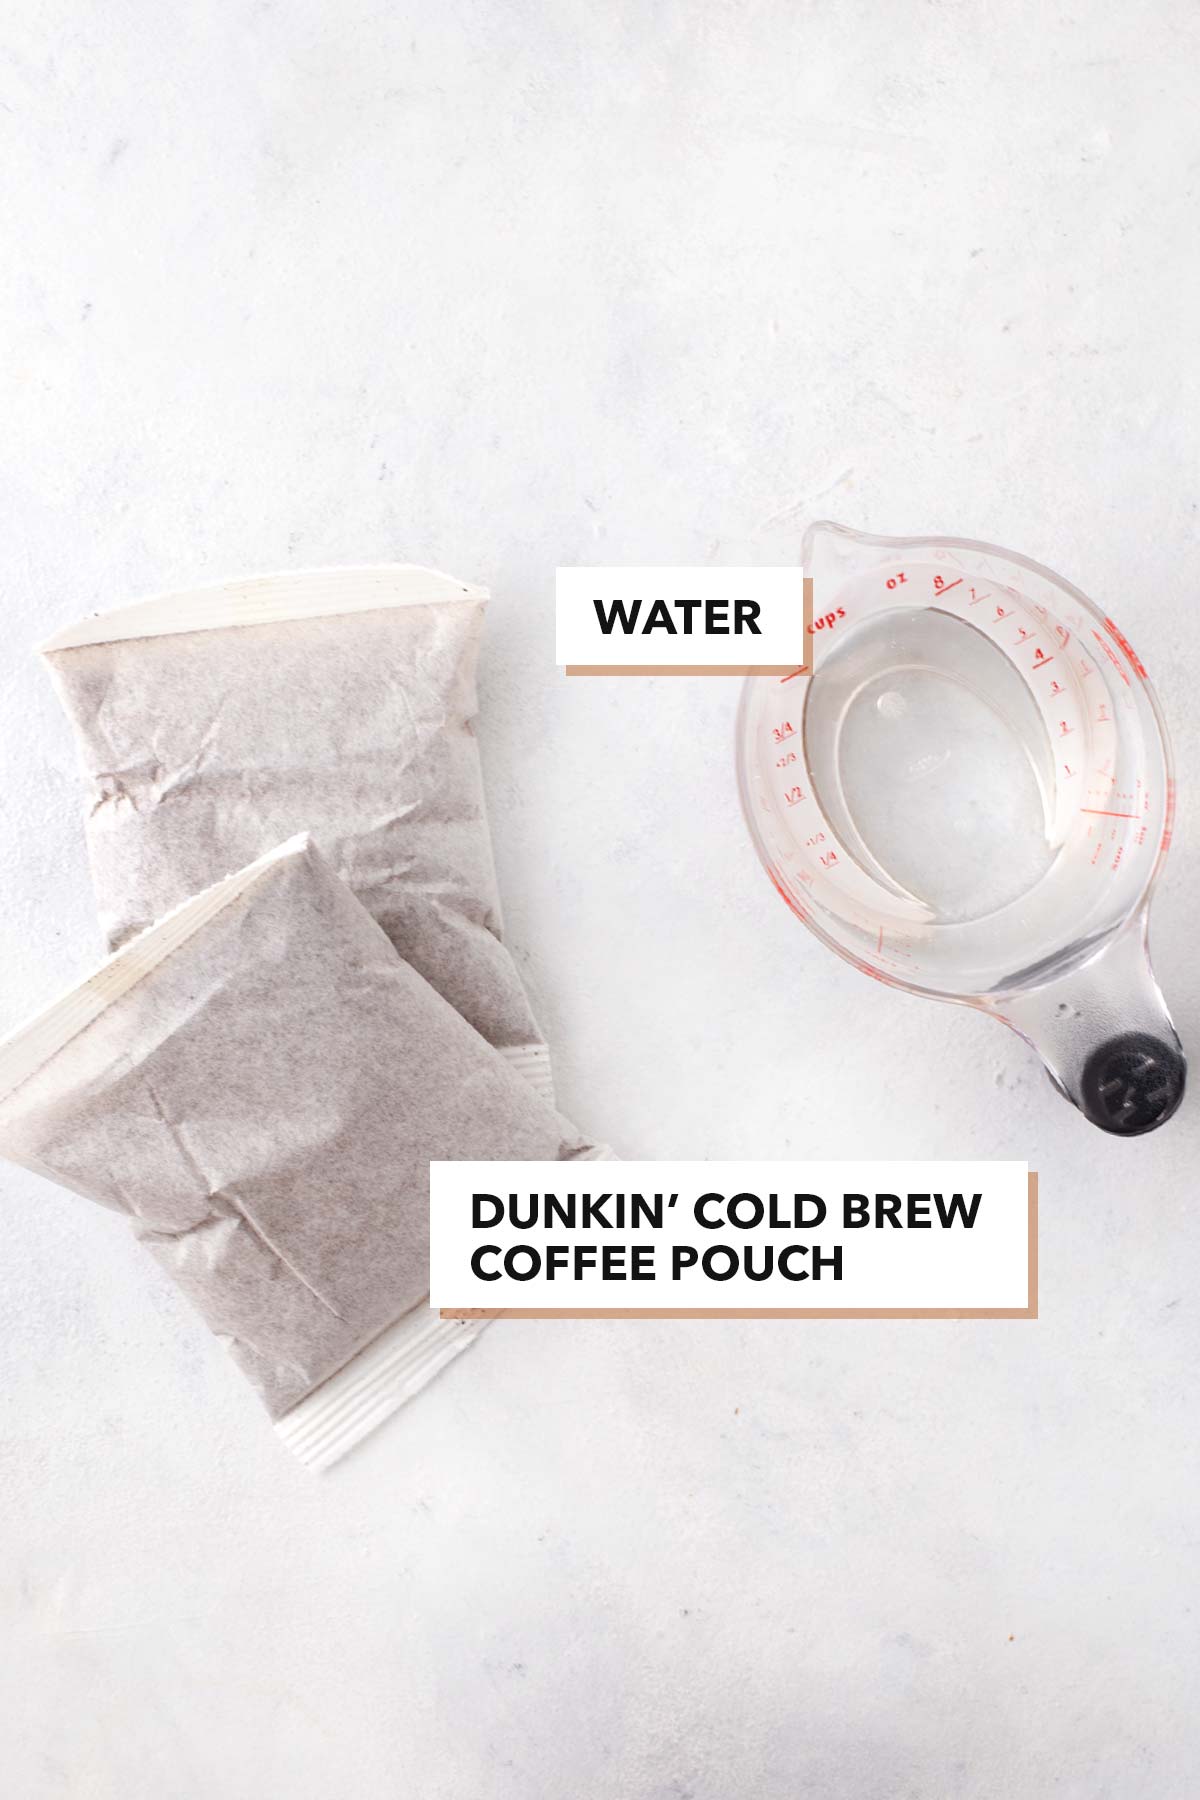 Dunkin' Cold Brew Copycat ingredients in pouches and a clear measuring cup.